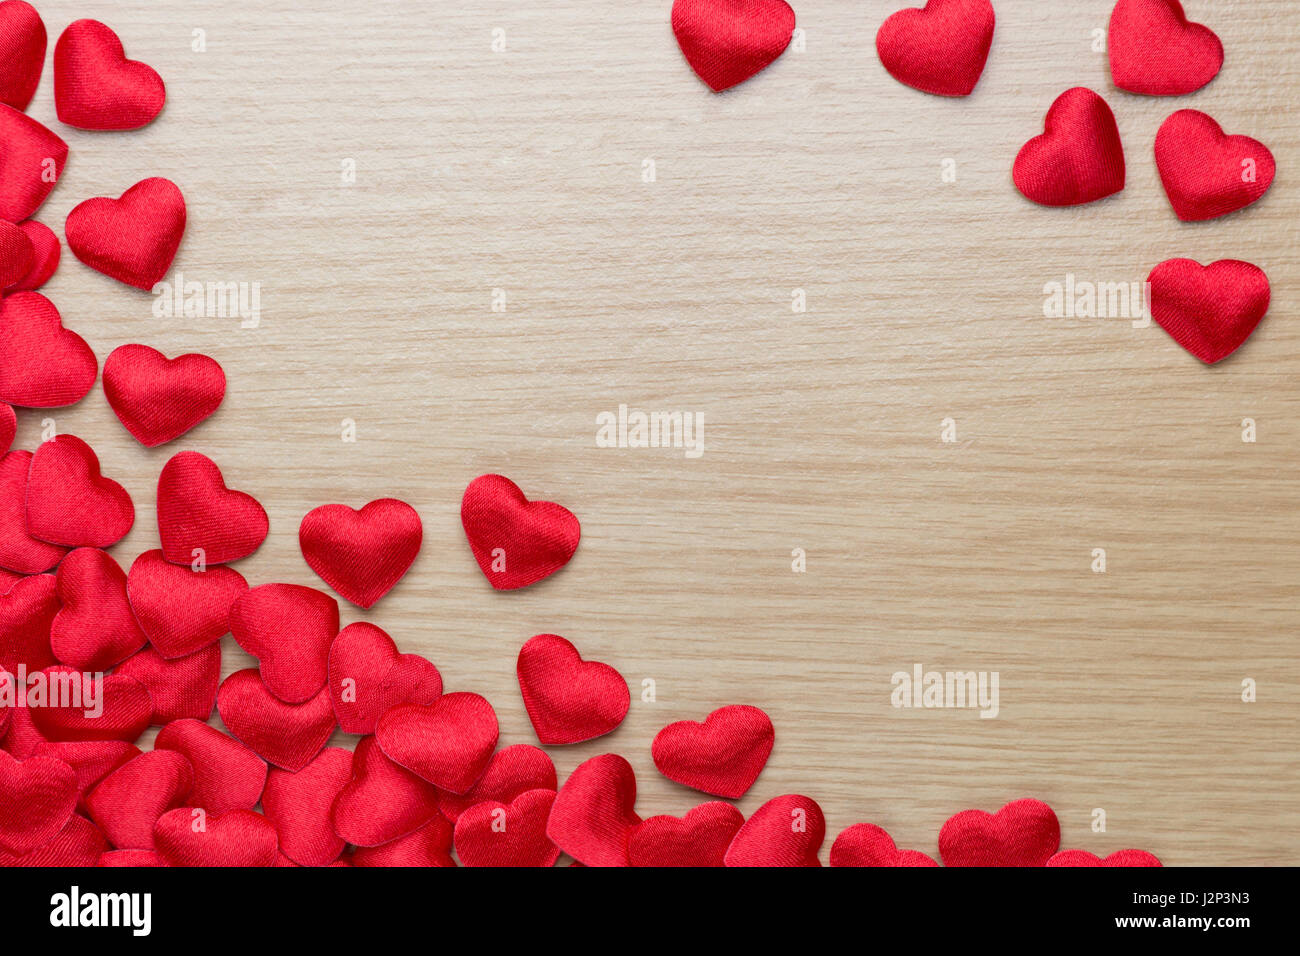 Small red hearts gather on wood table with space for text, good for valentine's day or special occasions Stock Photo